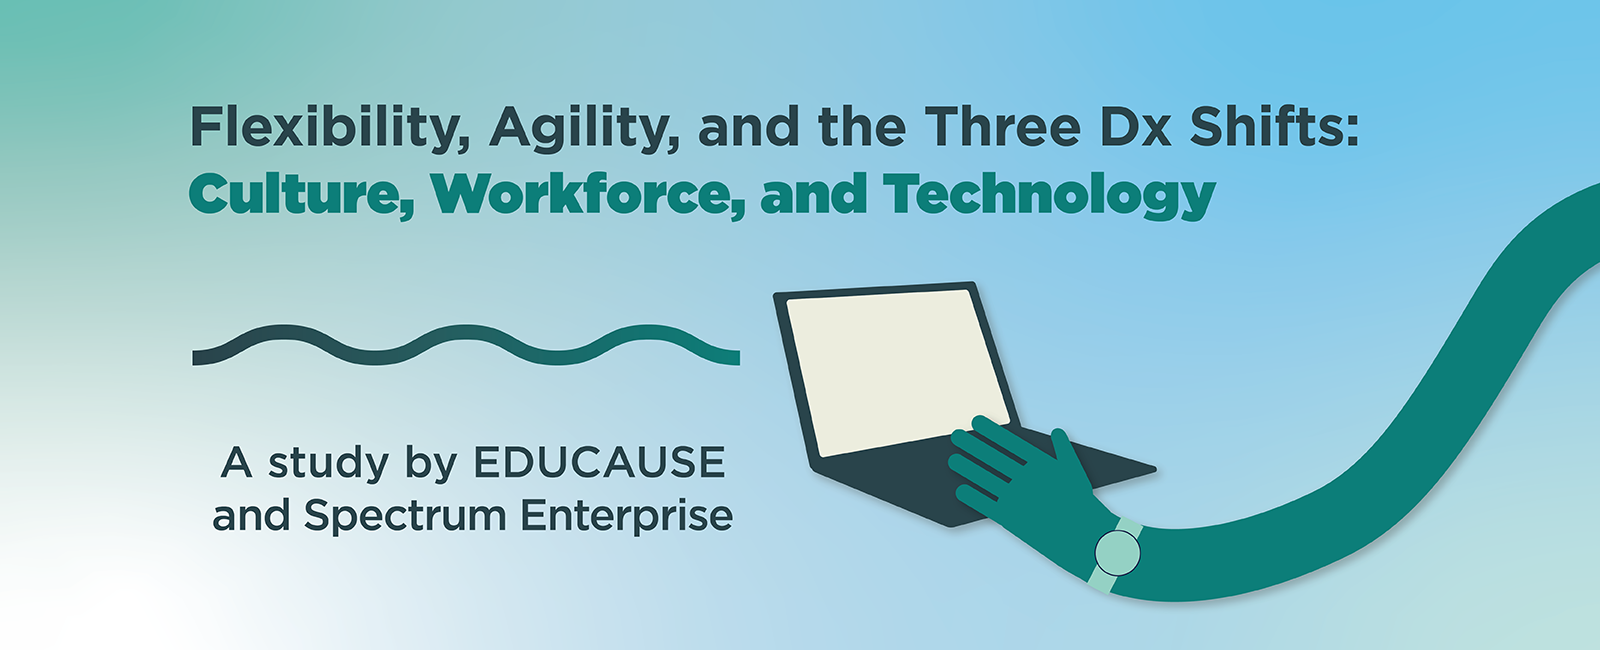 Flexibility, Agility, and the Three Dx Shifts: Culture, Workforce, and Technology